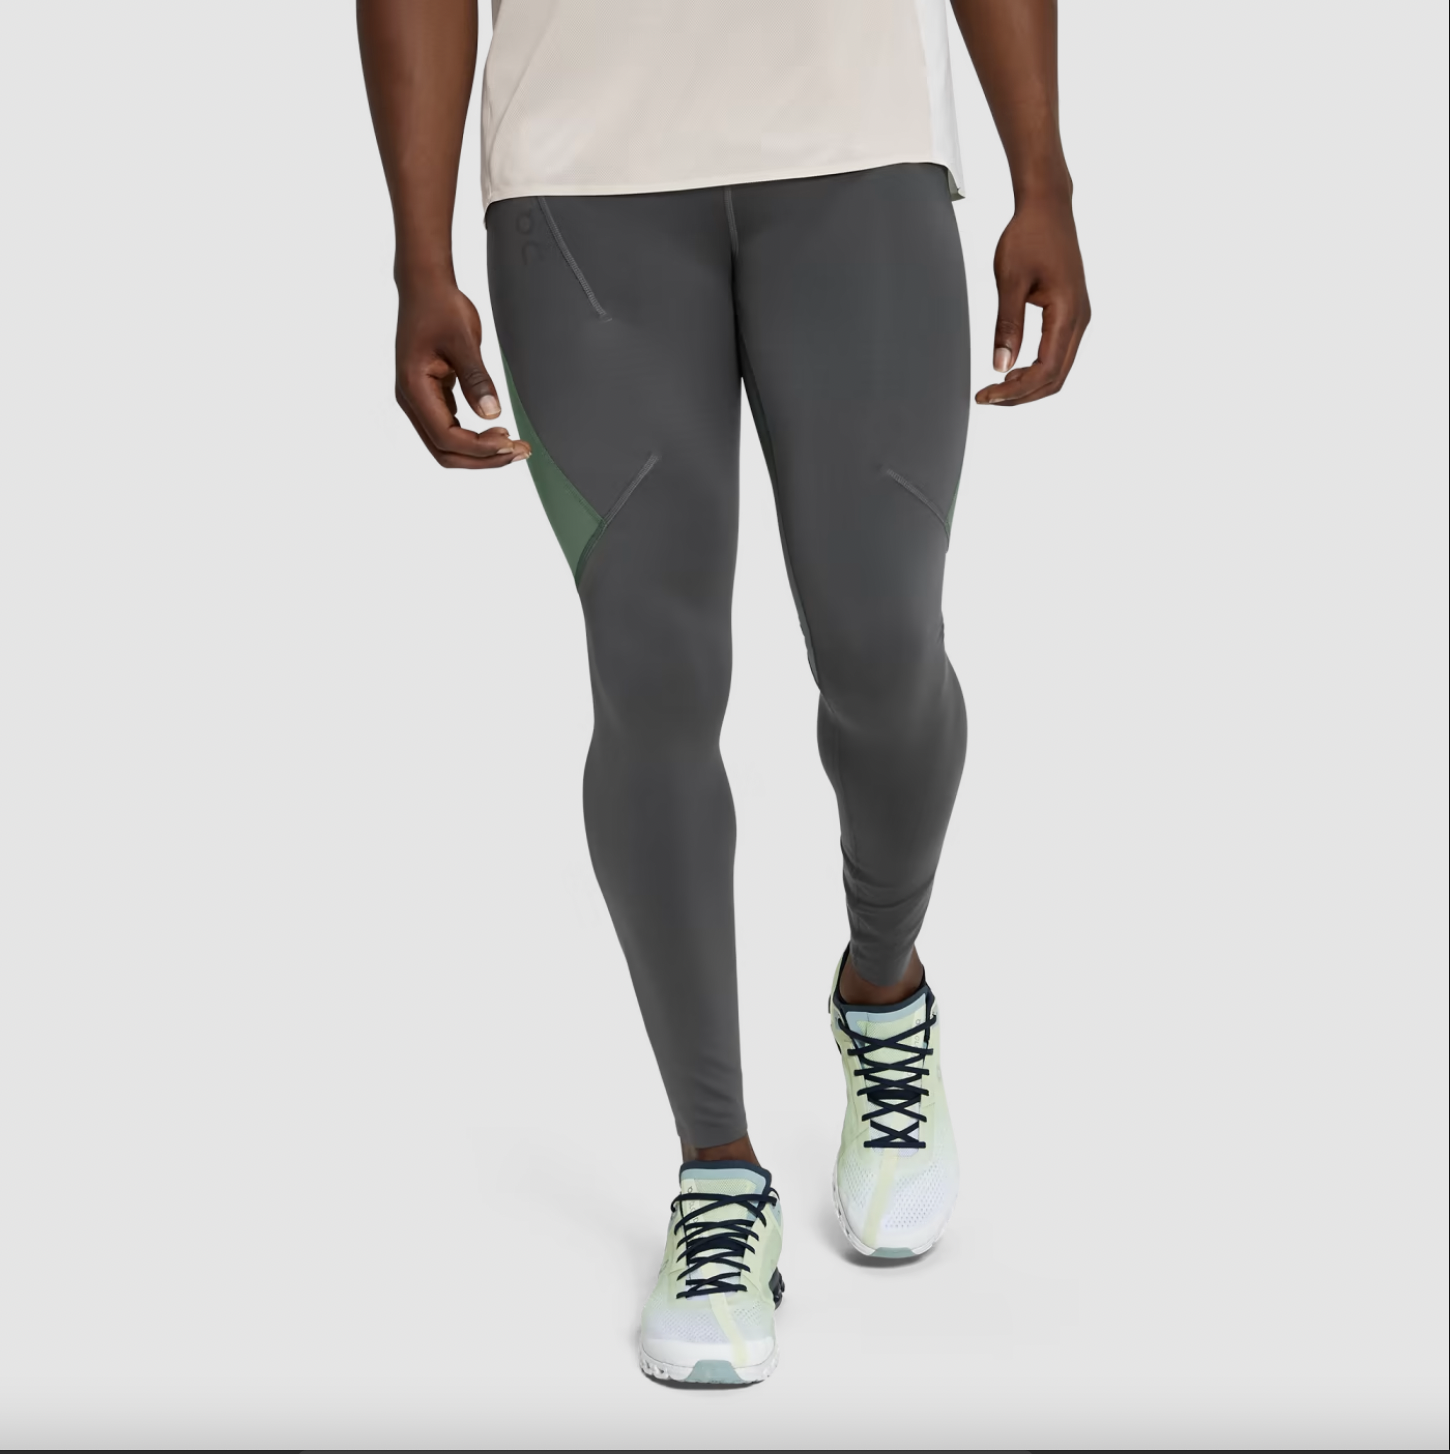 Do sports compression tights help you recover after a workout? | Victoria  University